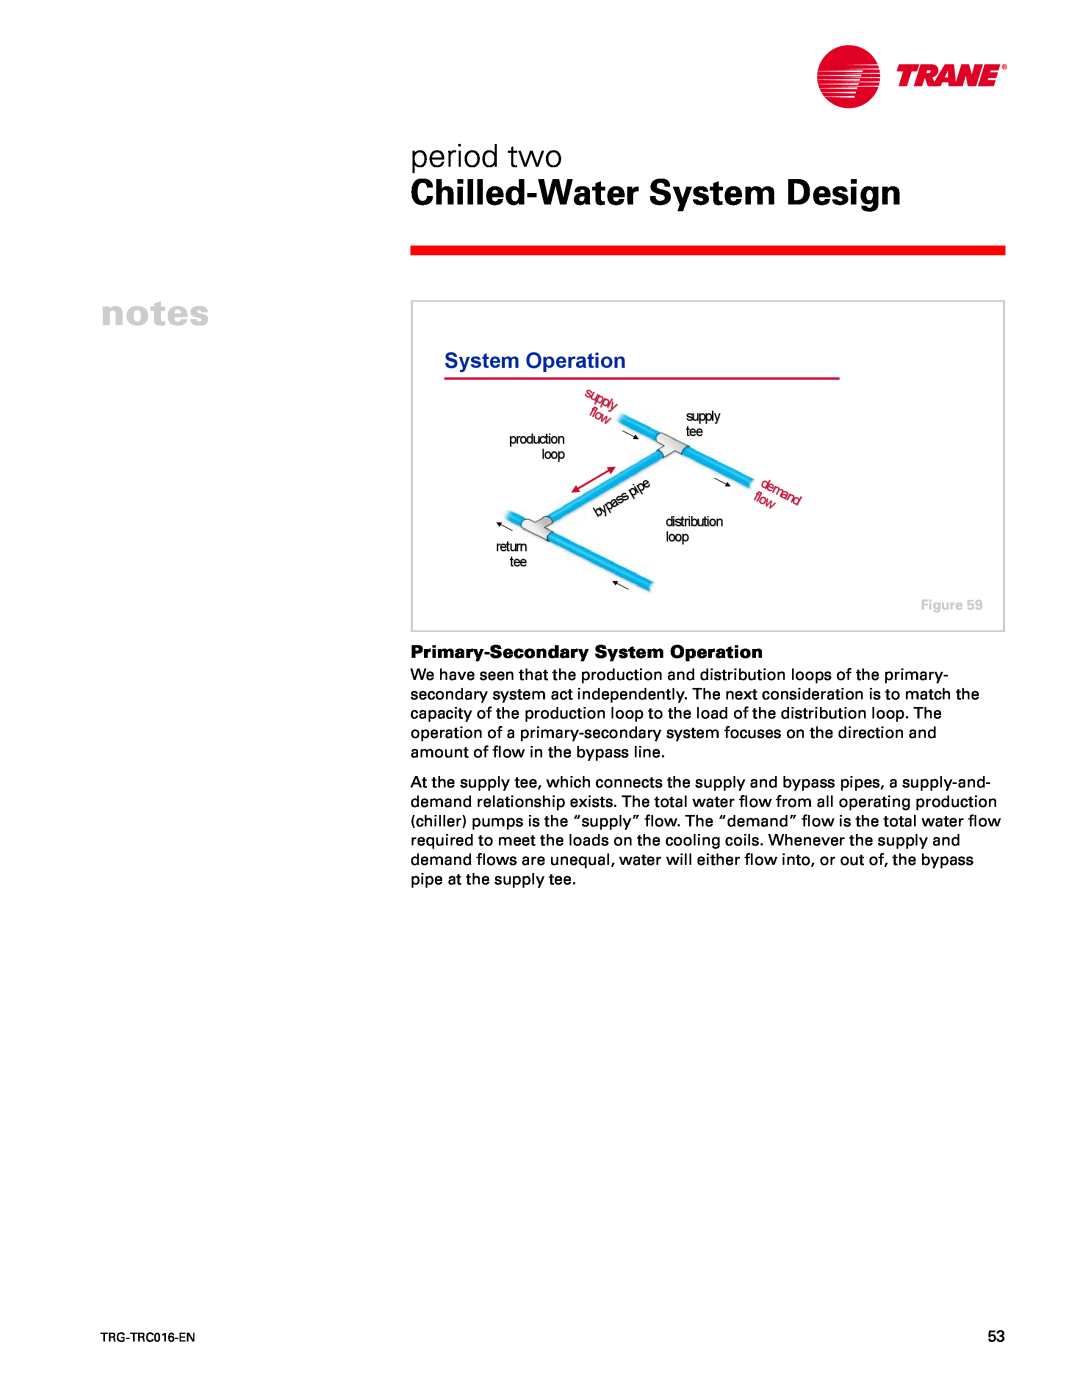 Trane TRG-TRC016-EN manual System Operation, notes, Chilled-WaterSystem Design, period two 